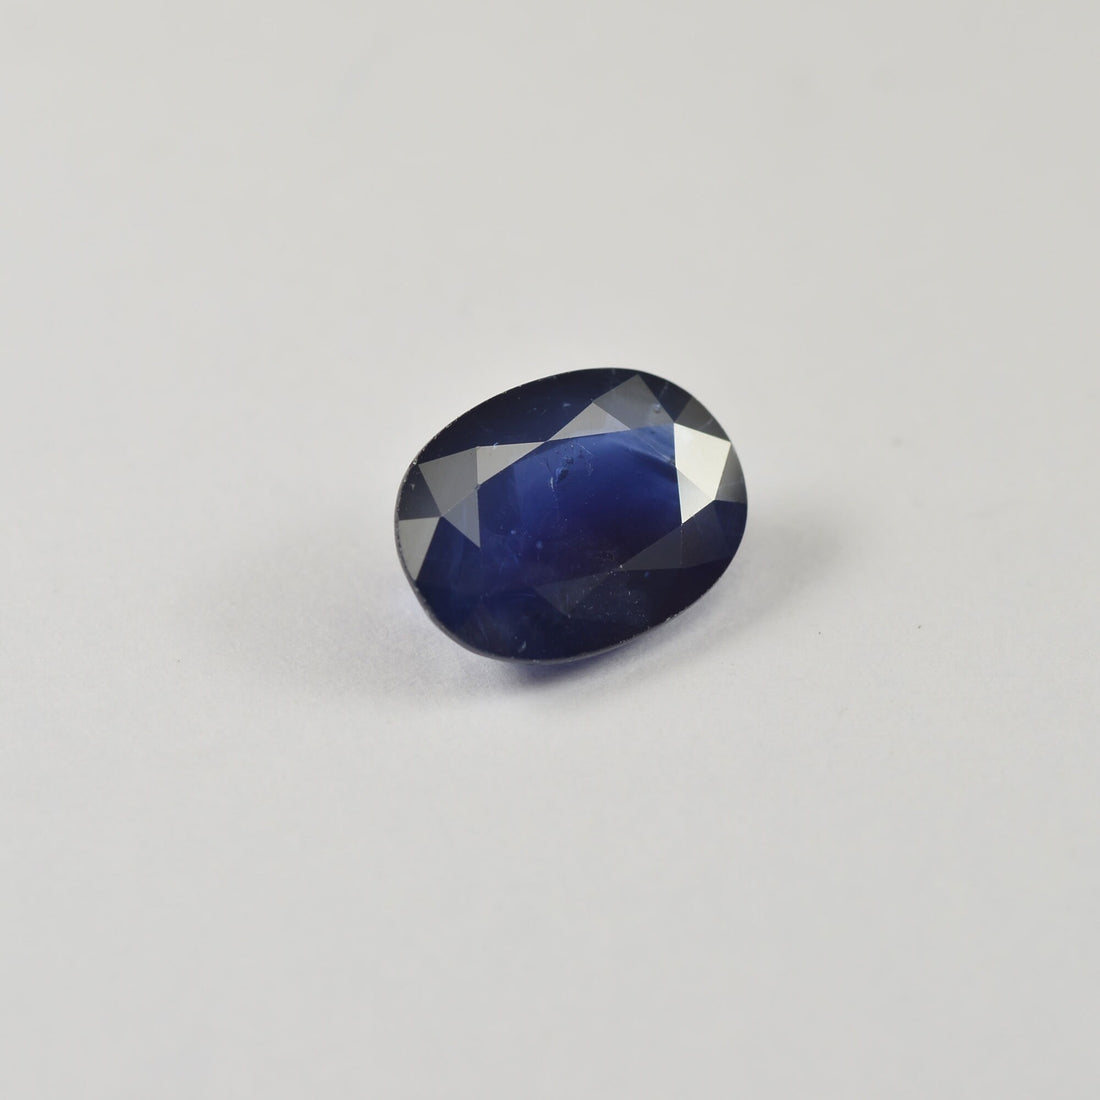 3.04 cts Natural Blue Sapphire Loose Gemstone Oval Cut